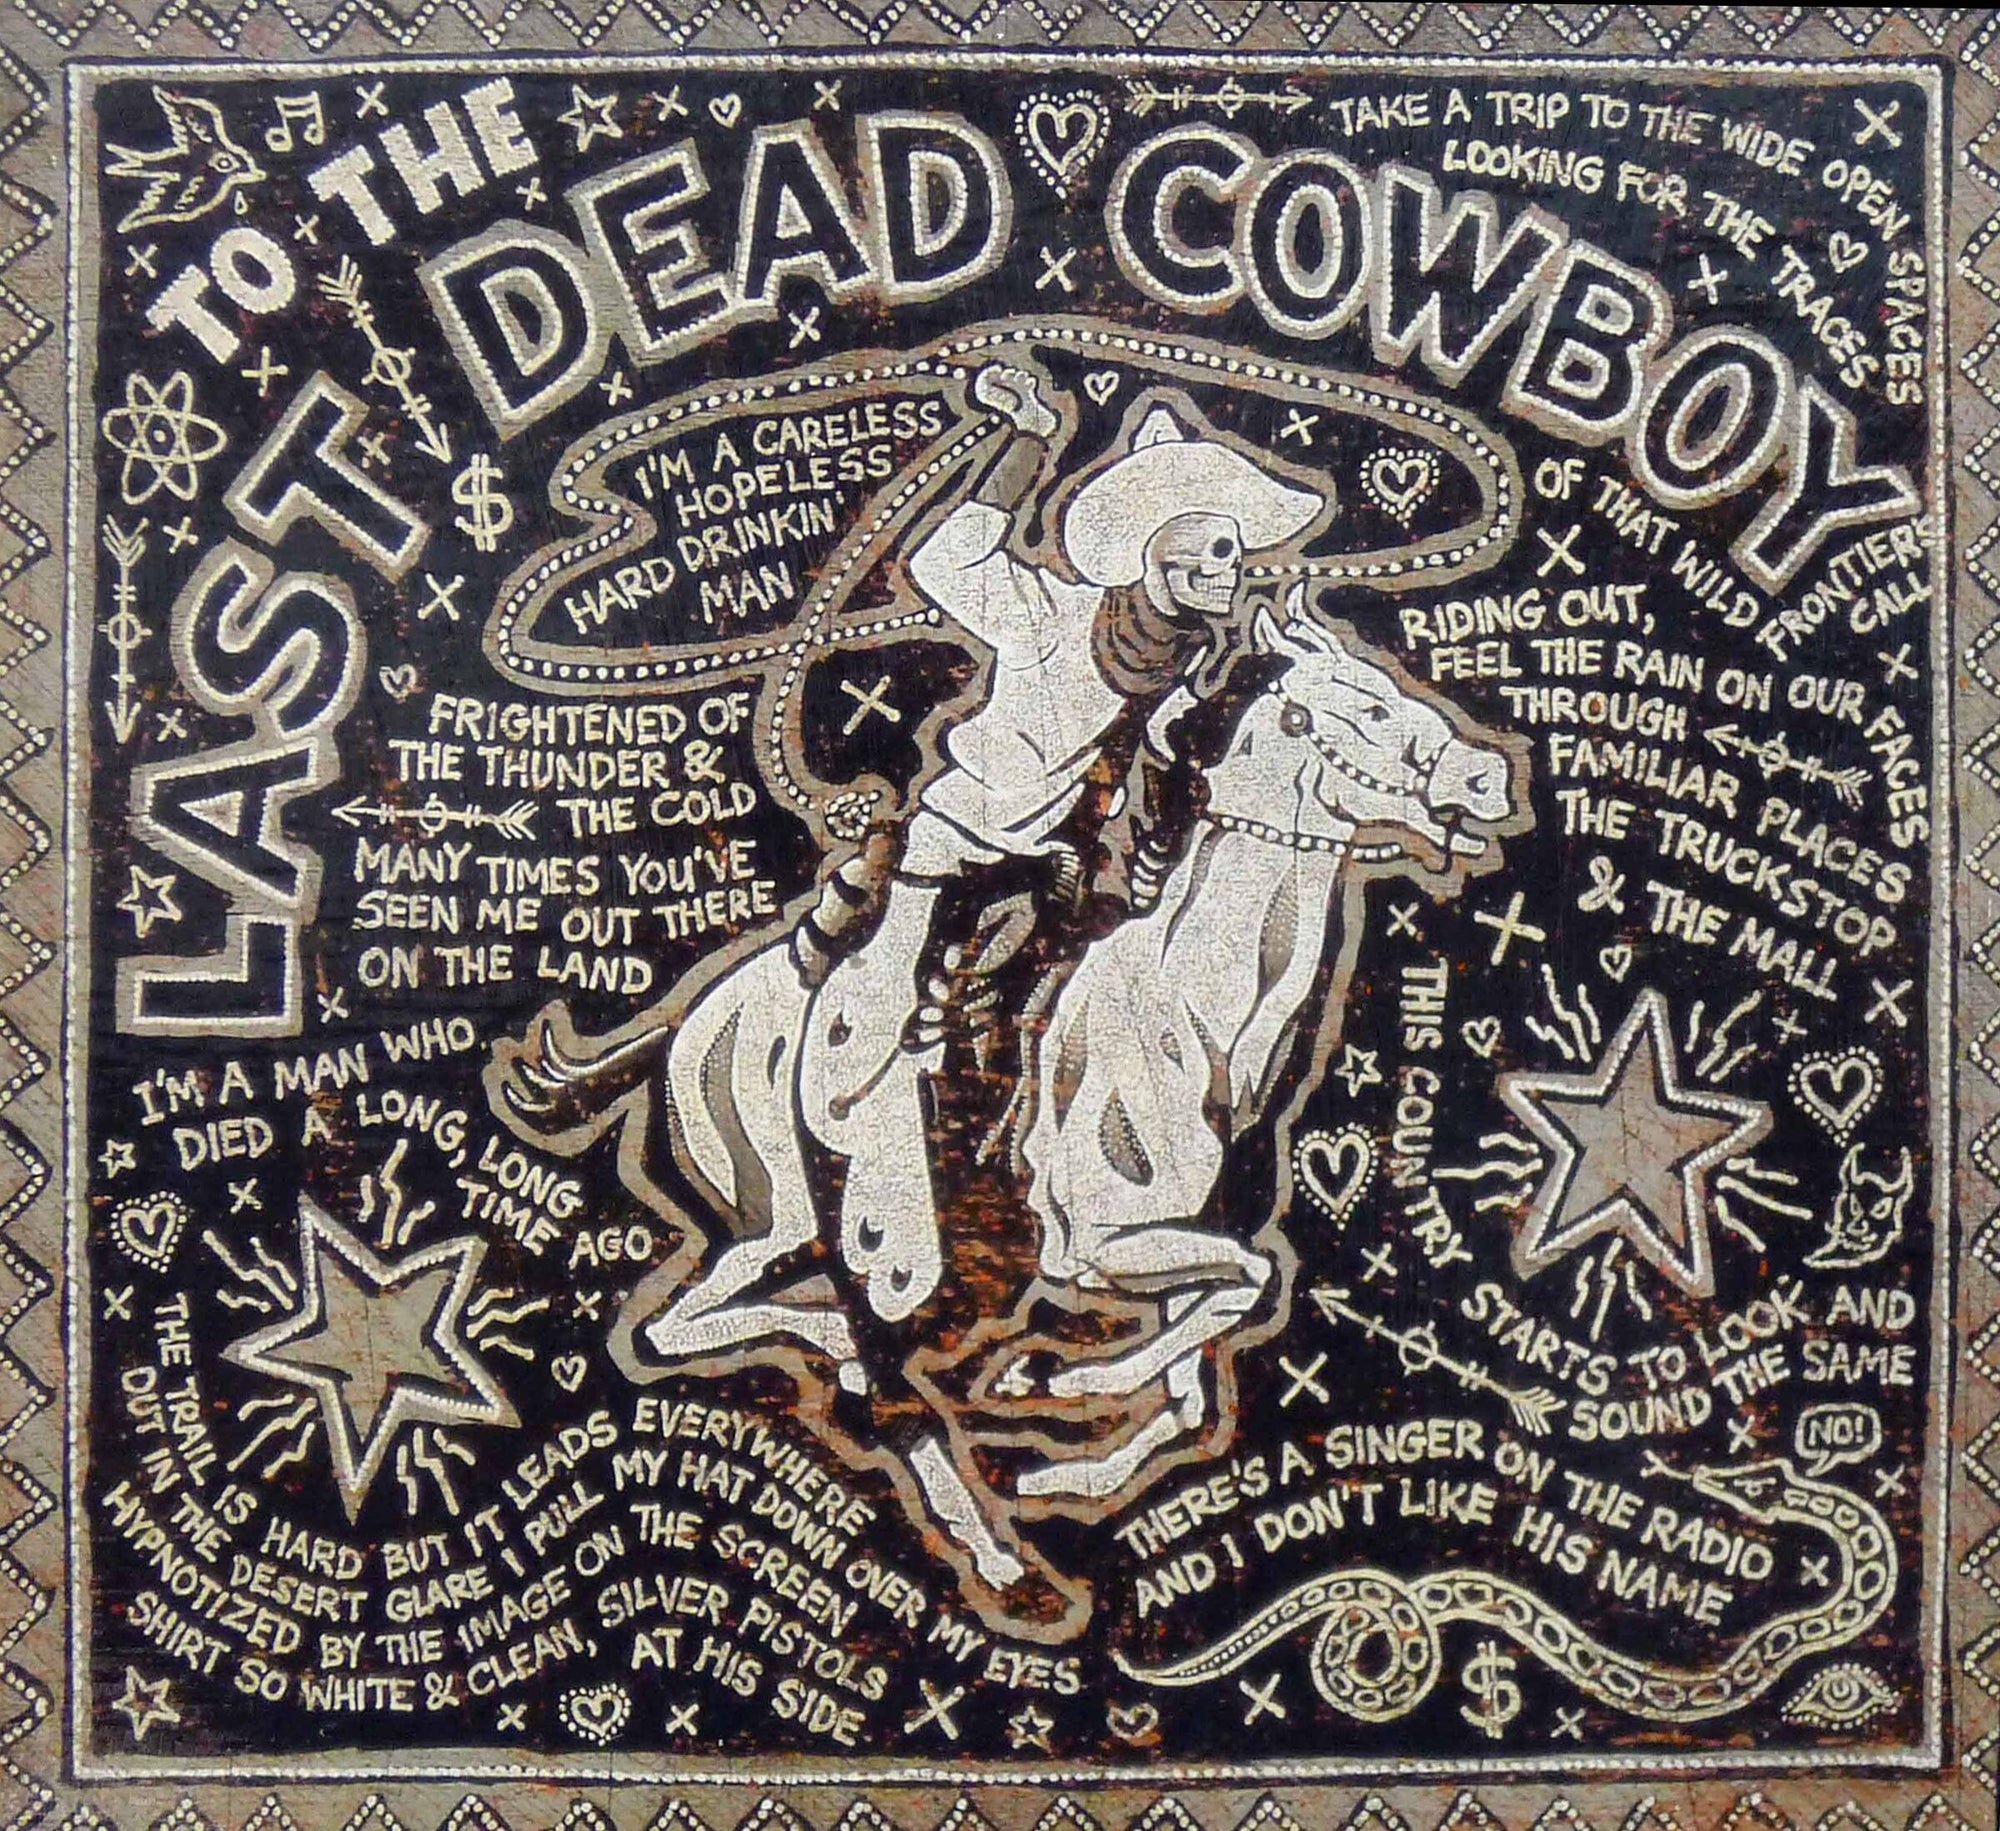 To The Last Dead Cowboy - Song Paintings Print # 10 Jon Langford